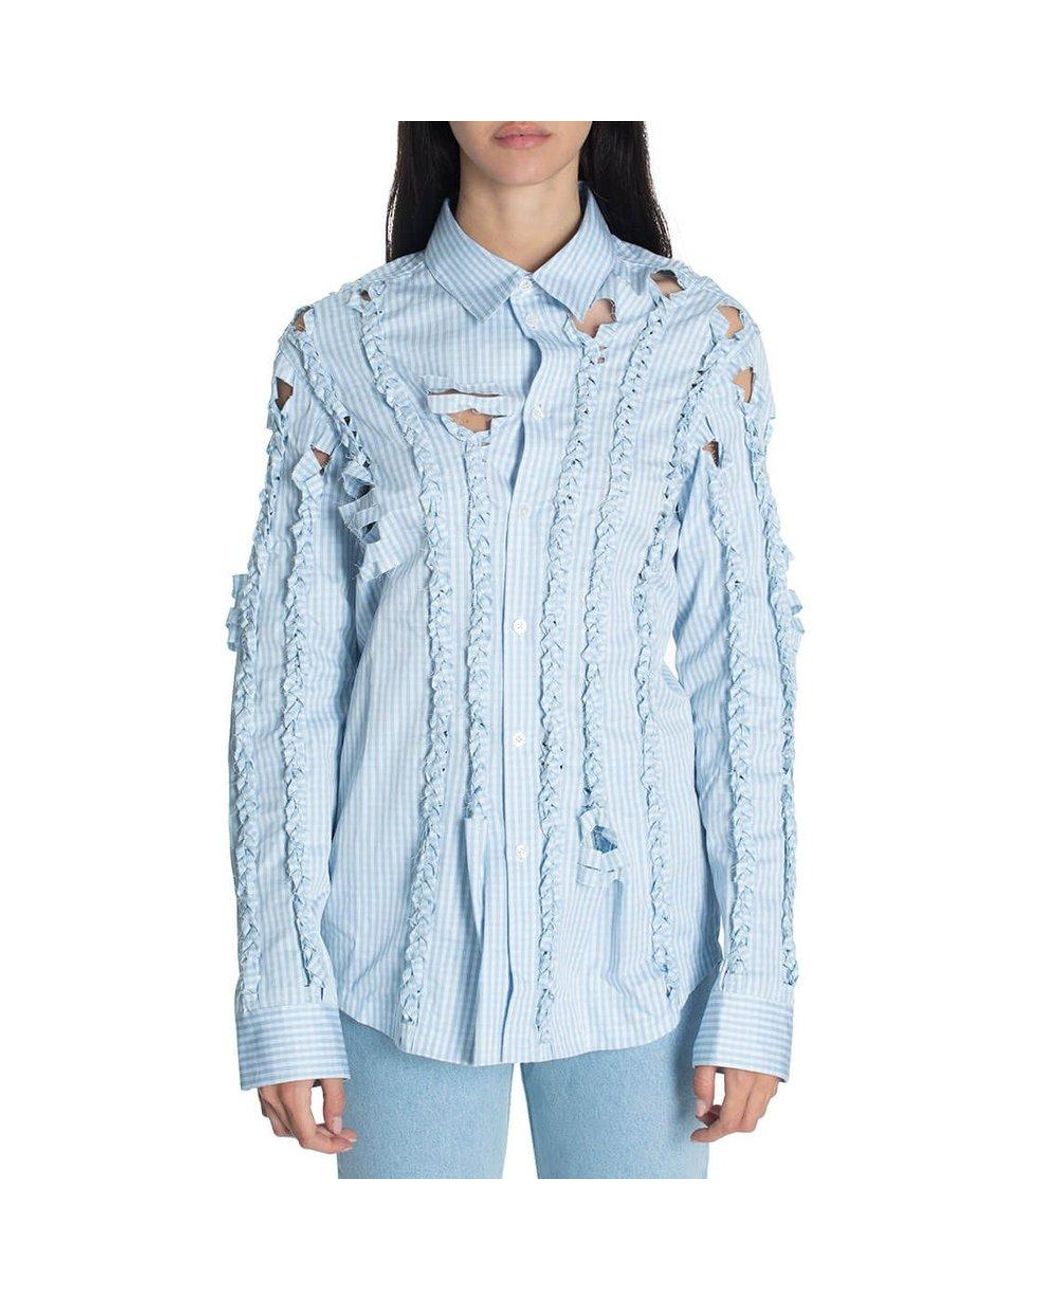 Martine Rose Knotted Detailed Poplin Shirt in Blue | Lyst